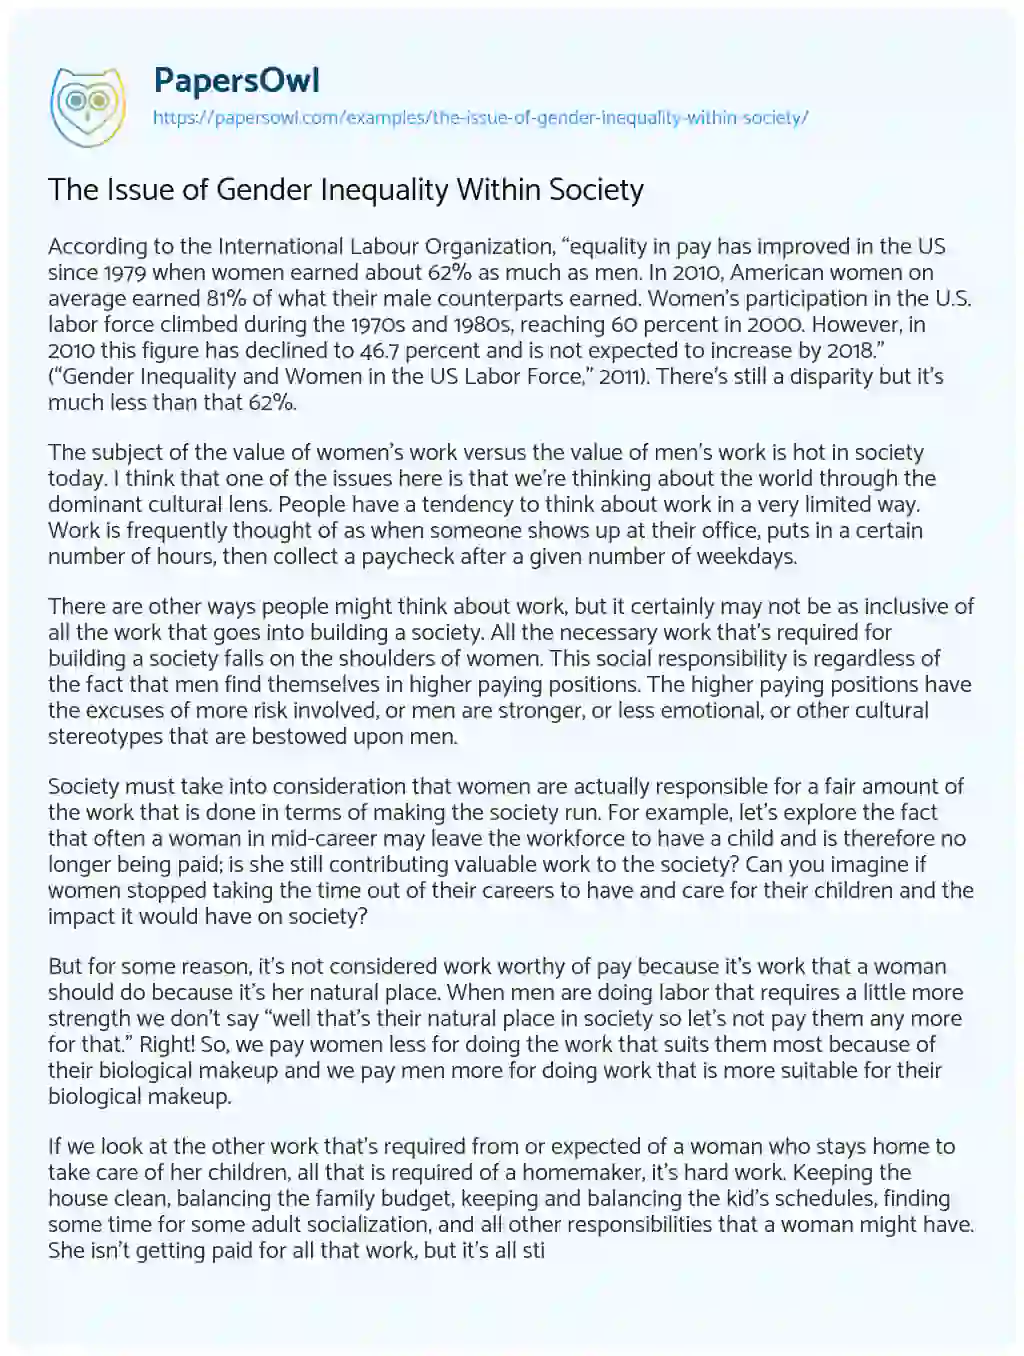 Essay on The Issue of Gender Inequality Within Society